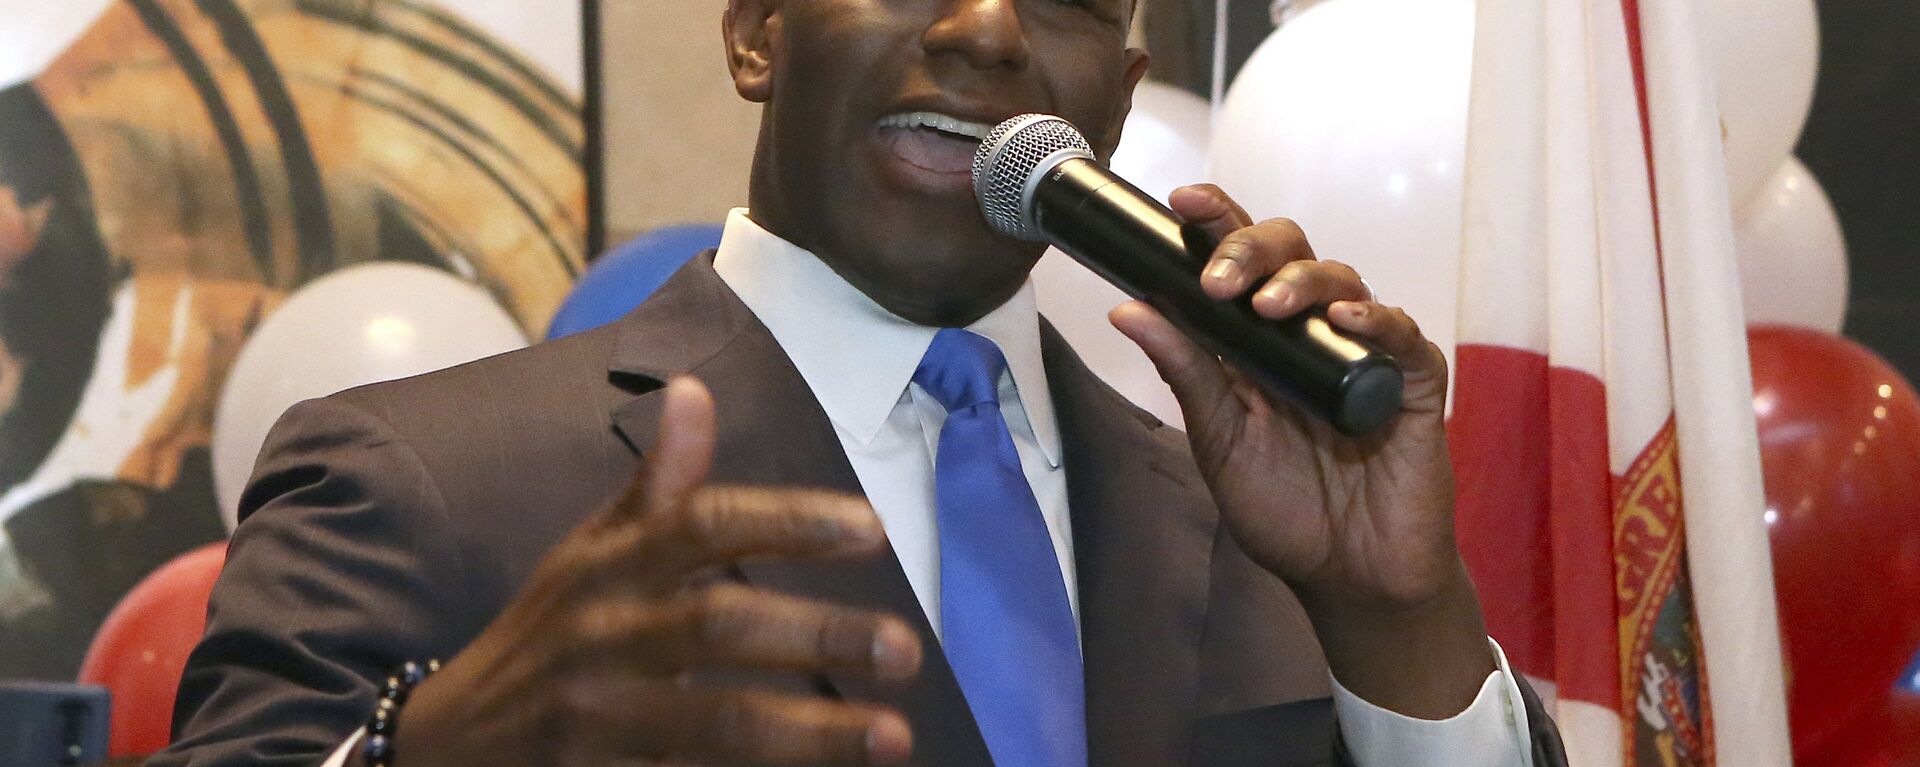 Andrew Gillum addresses his supporters after winning the Democrat primary for governor on Tuesday, Aug. 28, 2018, in Tallahassee, Fla. - Sputnik International, 1920, 29.08.2018